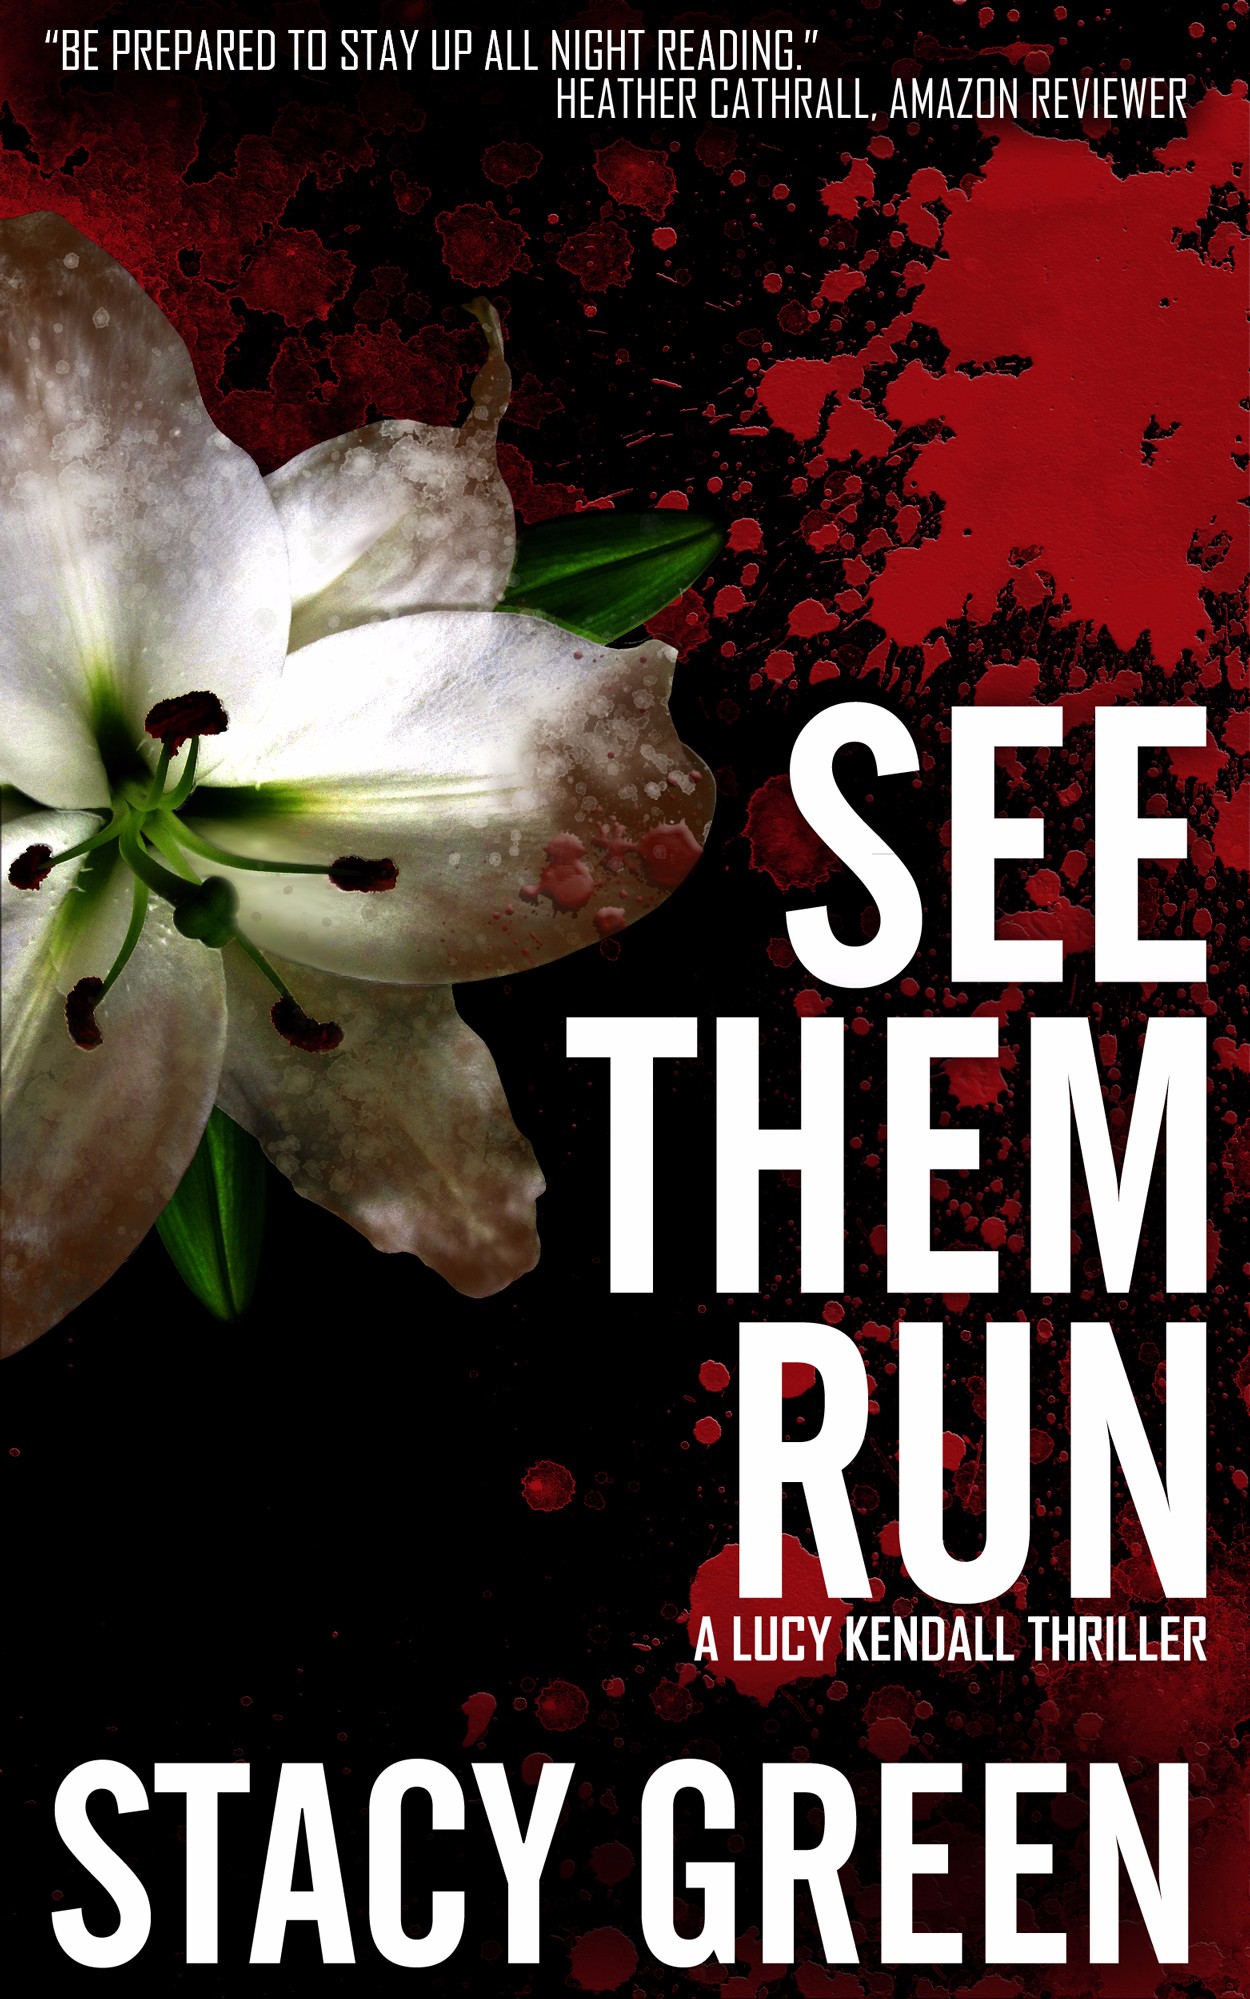 See Them Run by Author Stacy Green - A Lucy Kendall Thriller